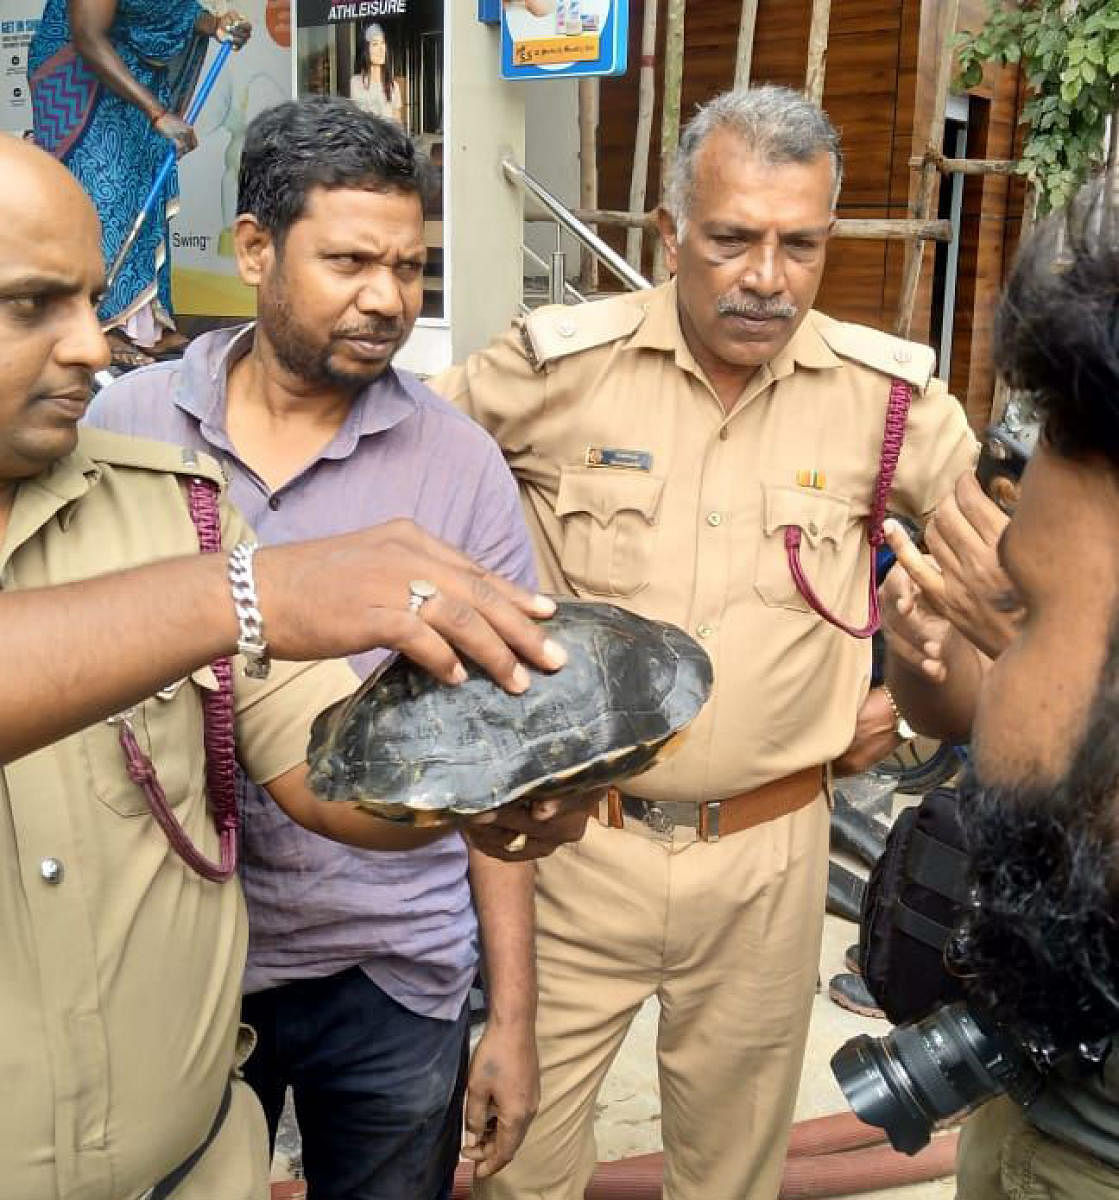 More than 10 volunteers of the Bruhat Bengaluru Mahanagara Palike (BBMP) wildlife cell, led by deputy conservator of forests (DCF) Ranganatha Swamy, were on constant vigil around the locality, and in less than 24 hours rescued about 16 snakes and a couple of terrapins (turtles) braving difficult conditions.